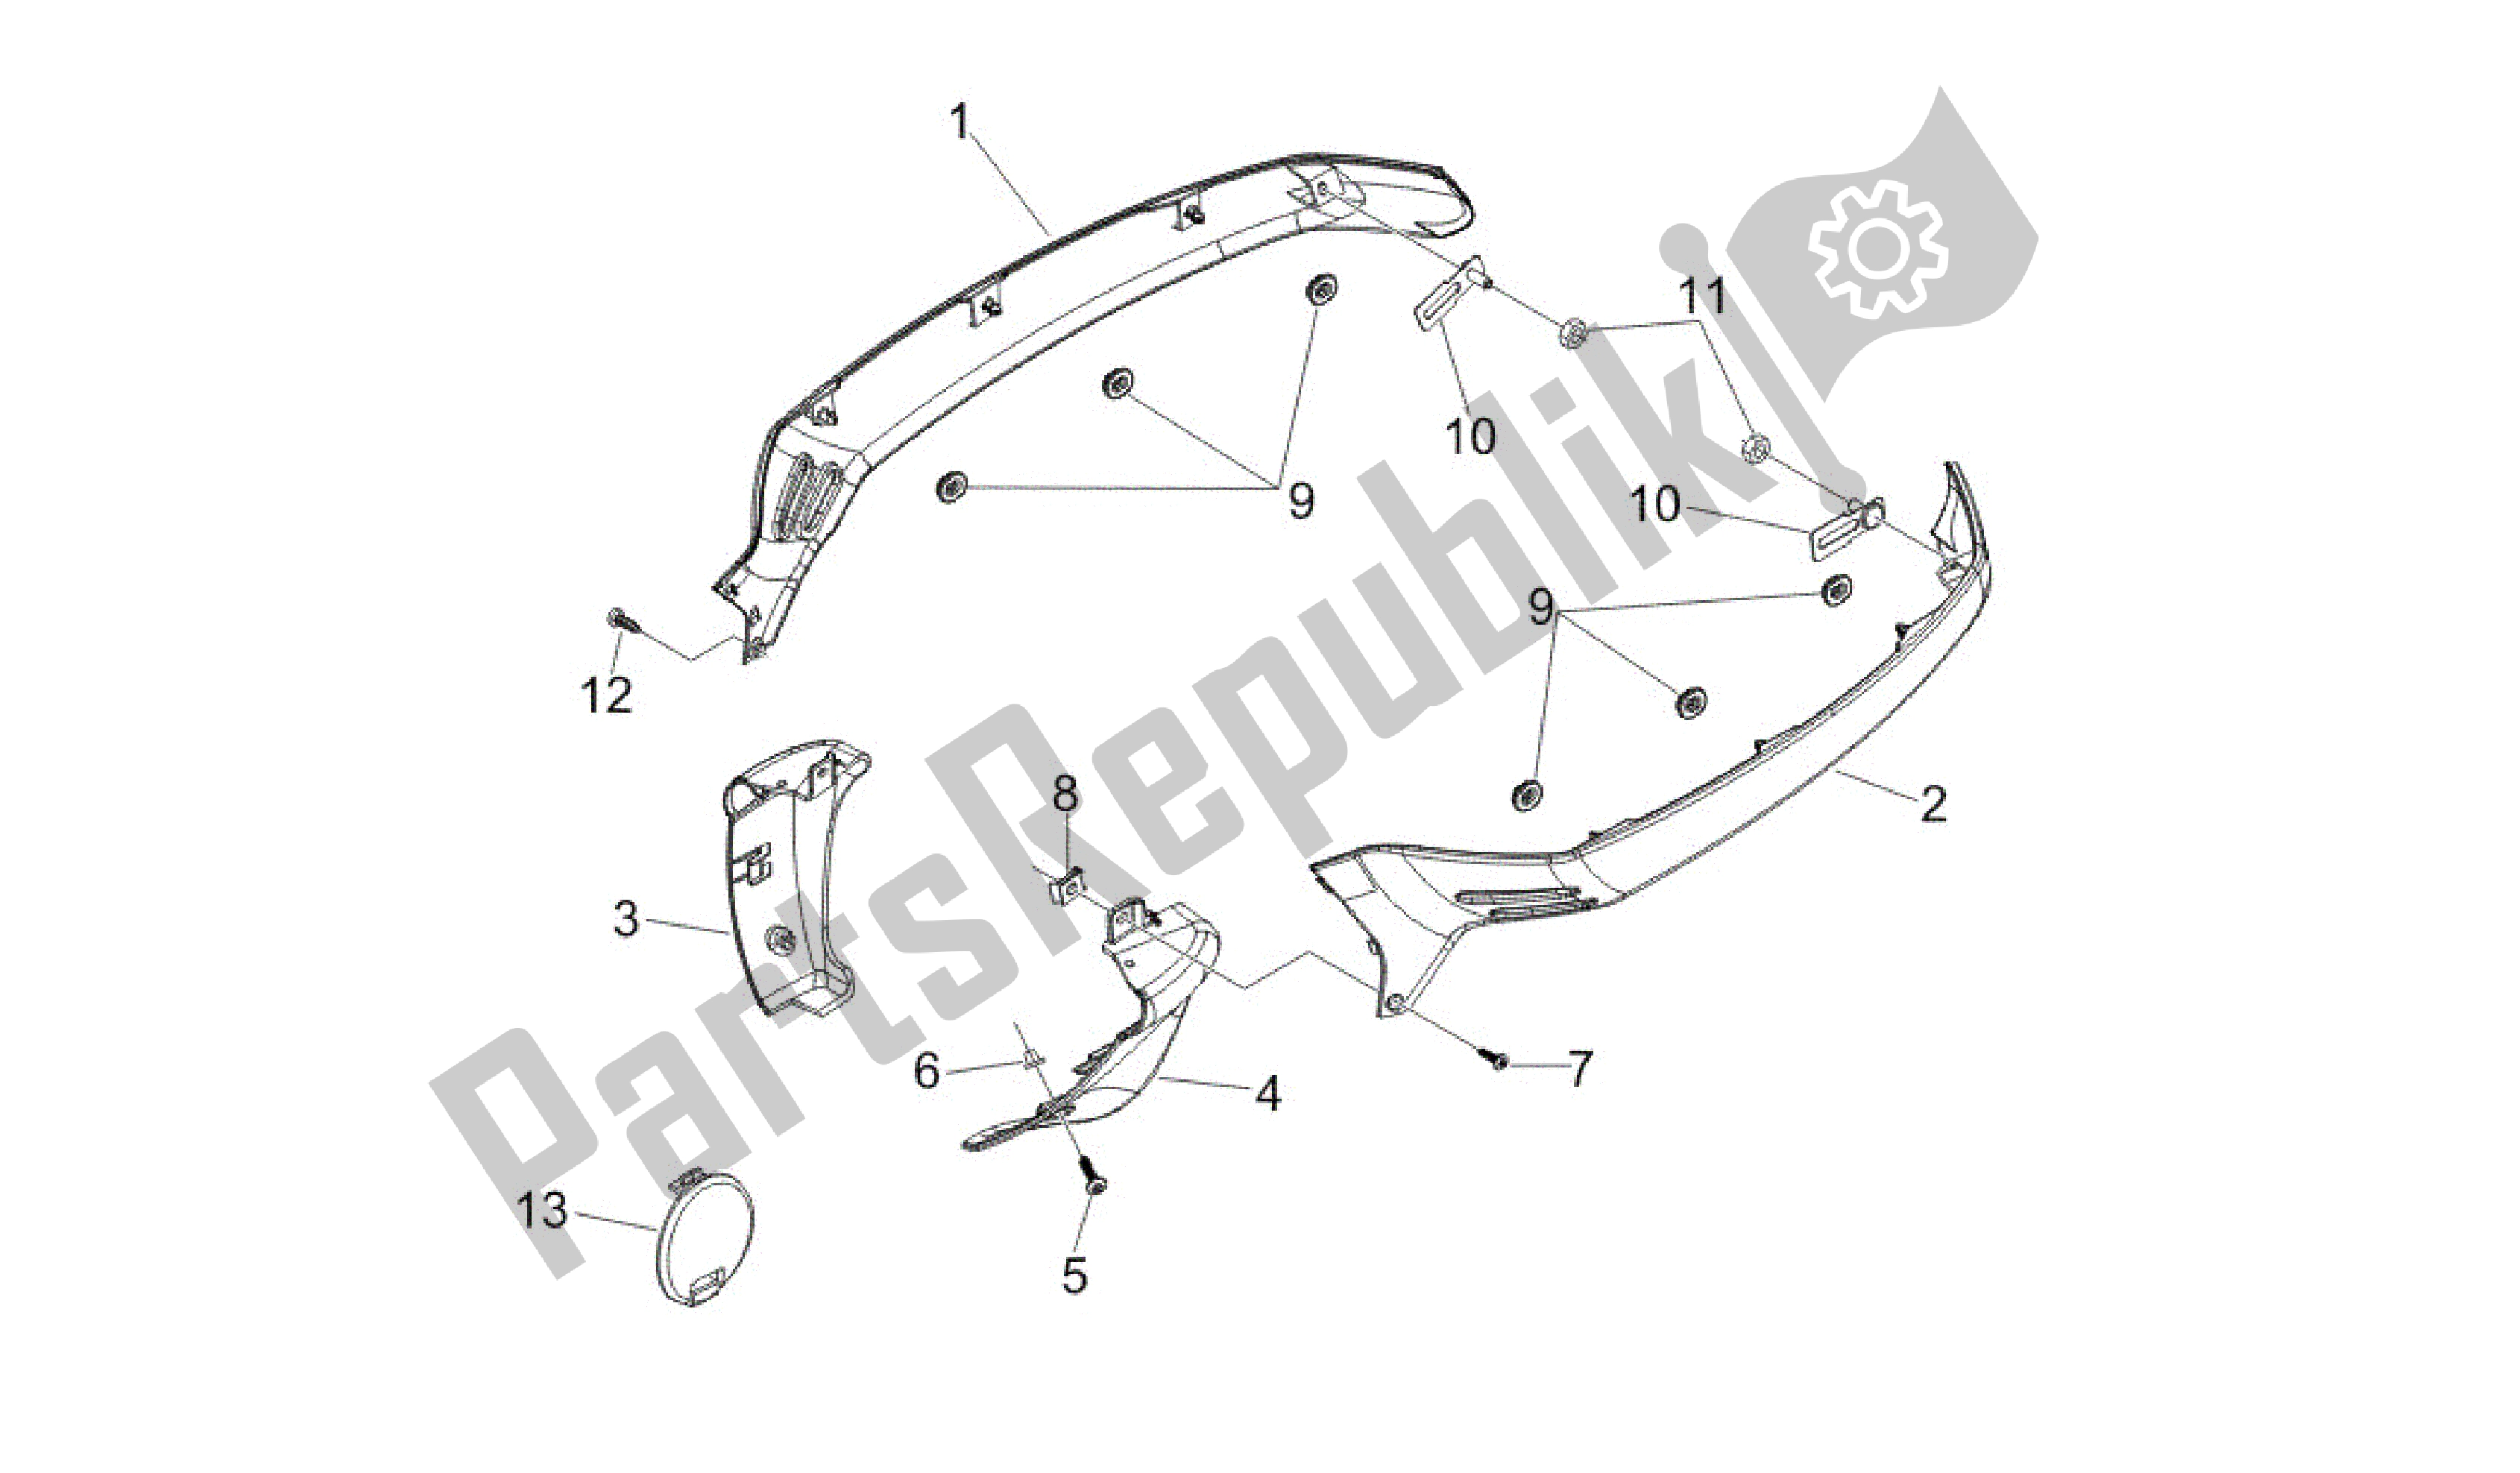 All parts for the Cubiertas Laterales - Spoiler of the Vespa GTV 250 2007